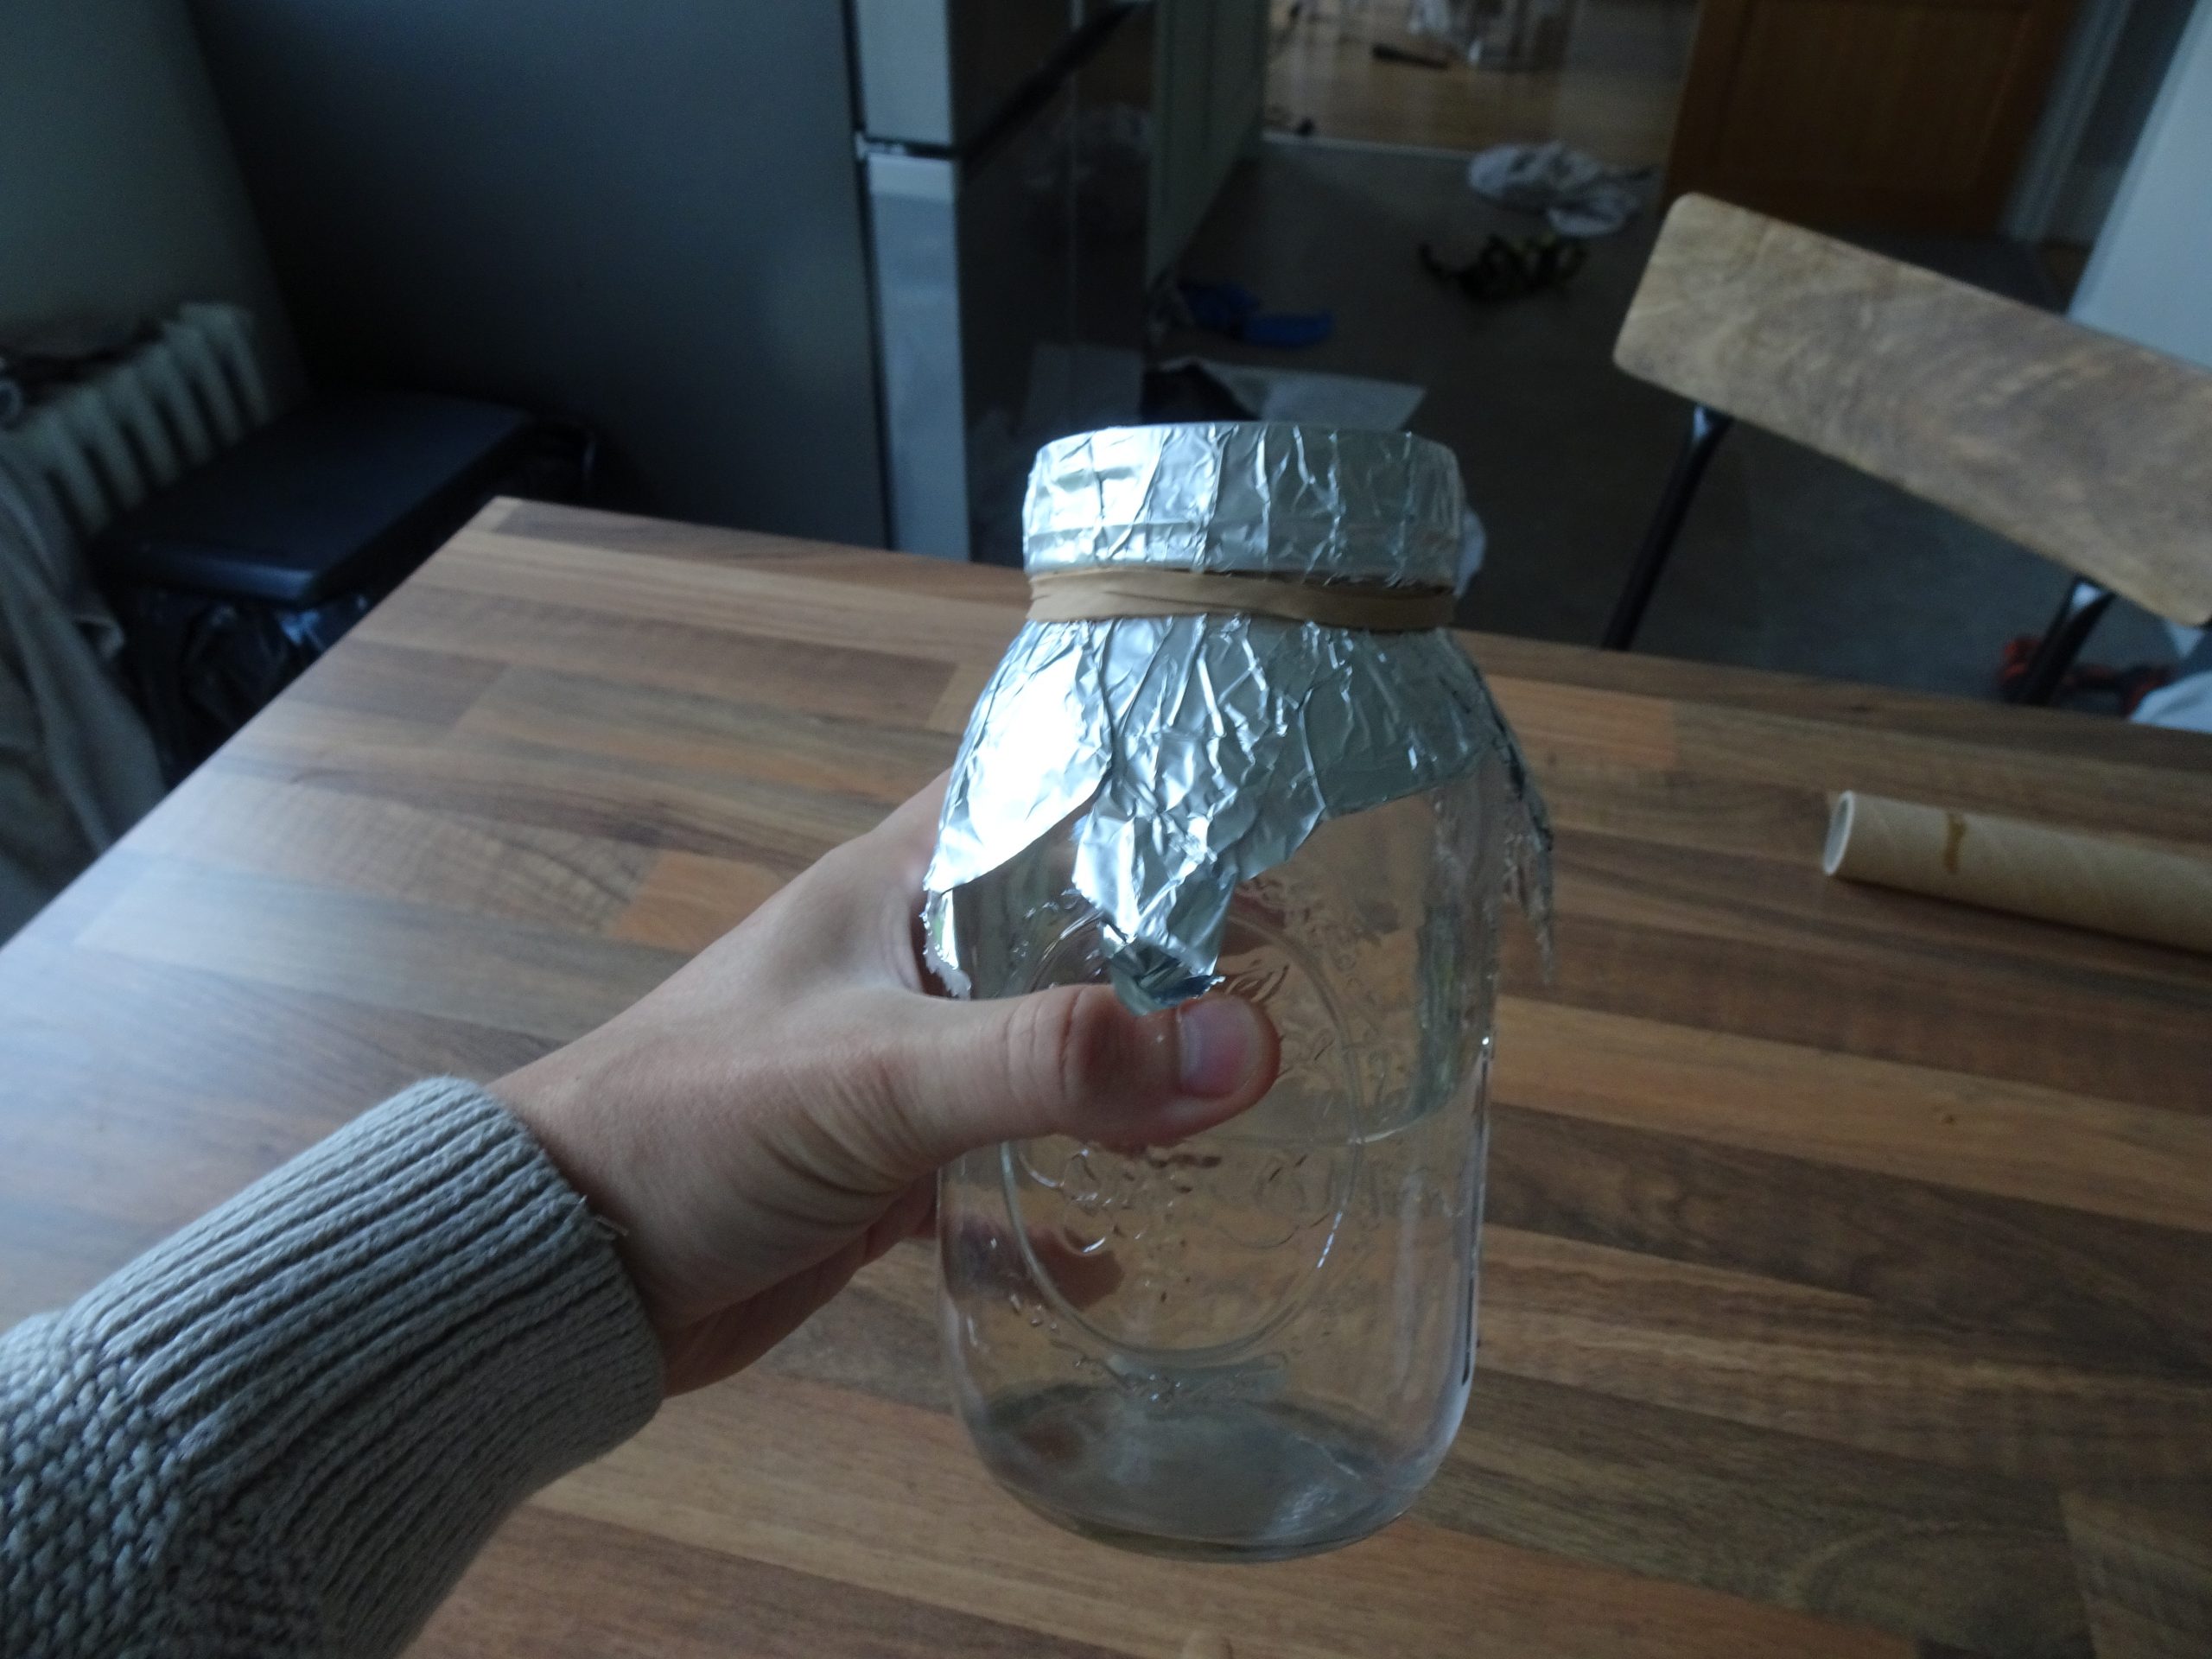 Jar held in hand with foil over top